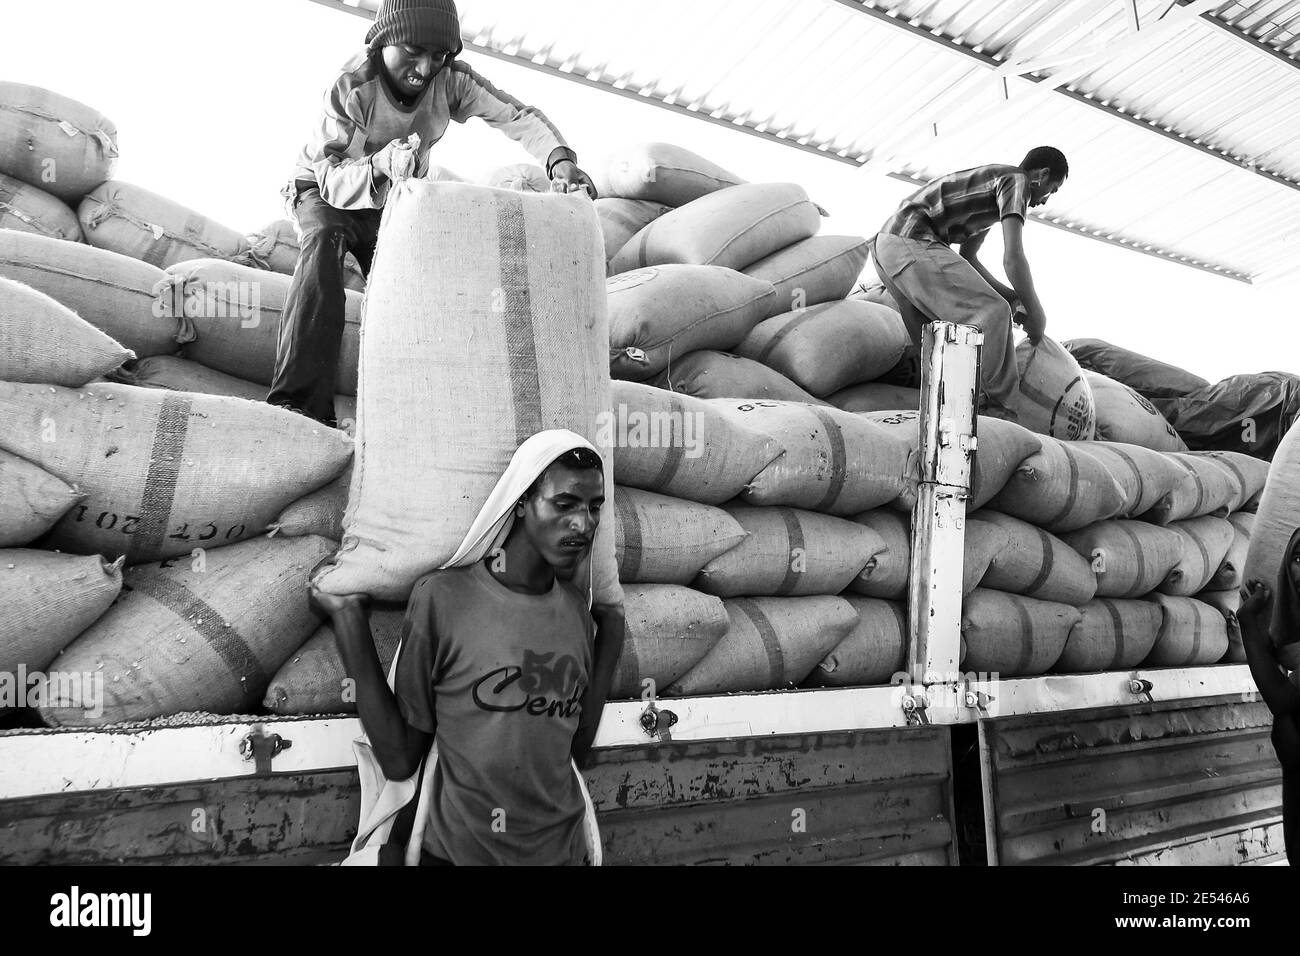 ADDIS ABABA, ETHIOPIA - Jan 05, 2021: Addis Ababa, Ethiopia - January 30 2014: Men stacking large bags of coffee beans in a warehouse Stock Photo